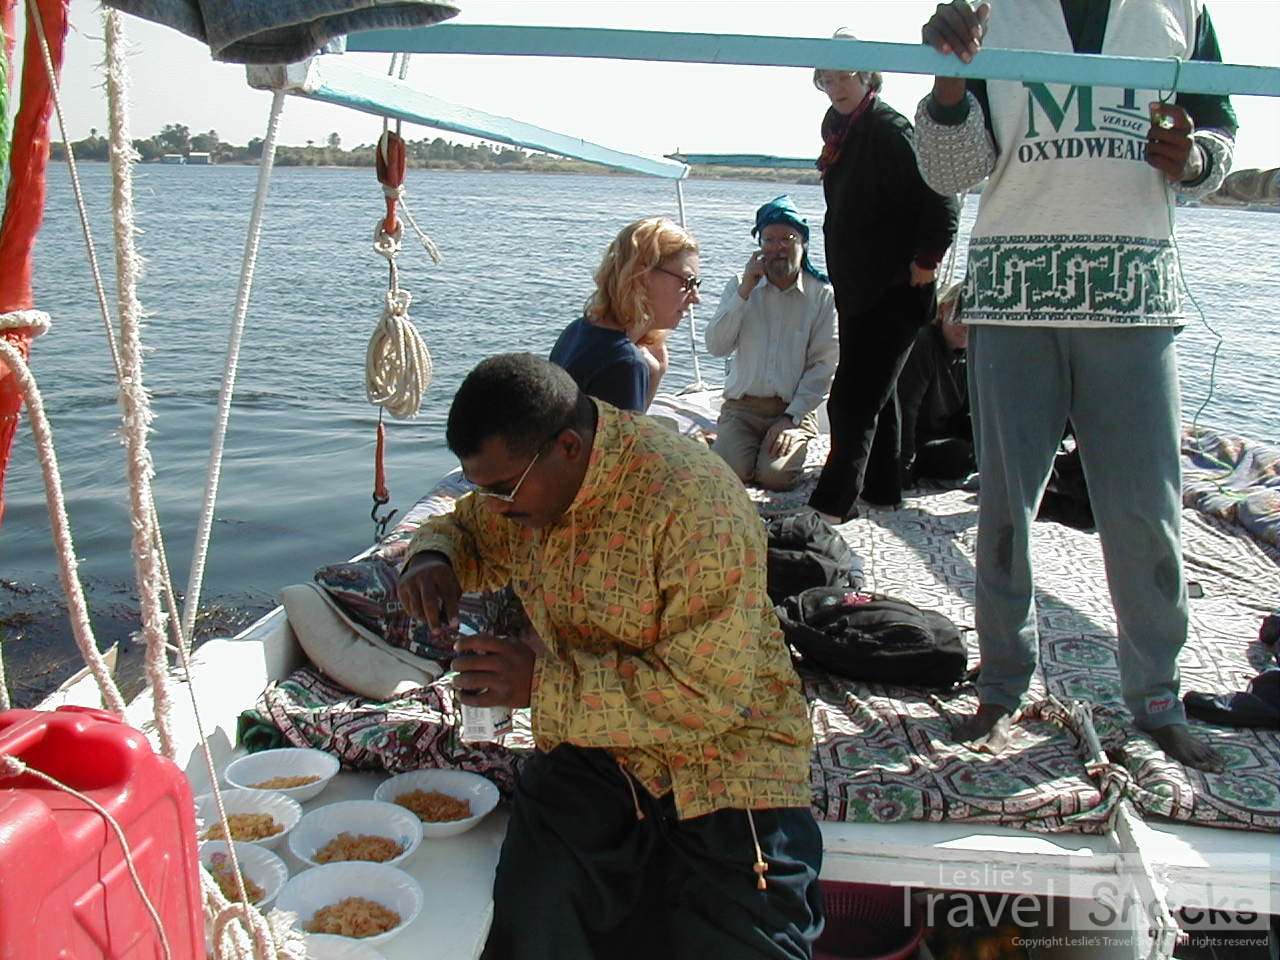 Preparing one of our delish meals on board the boat.